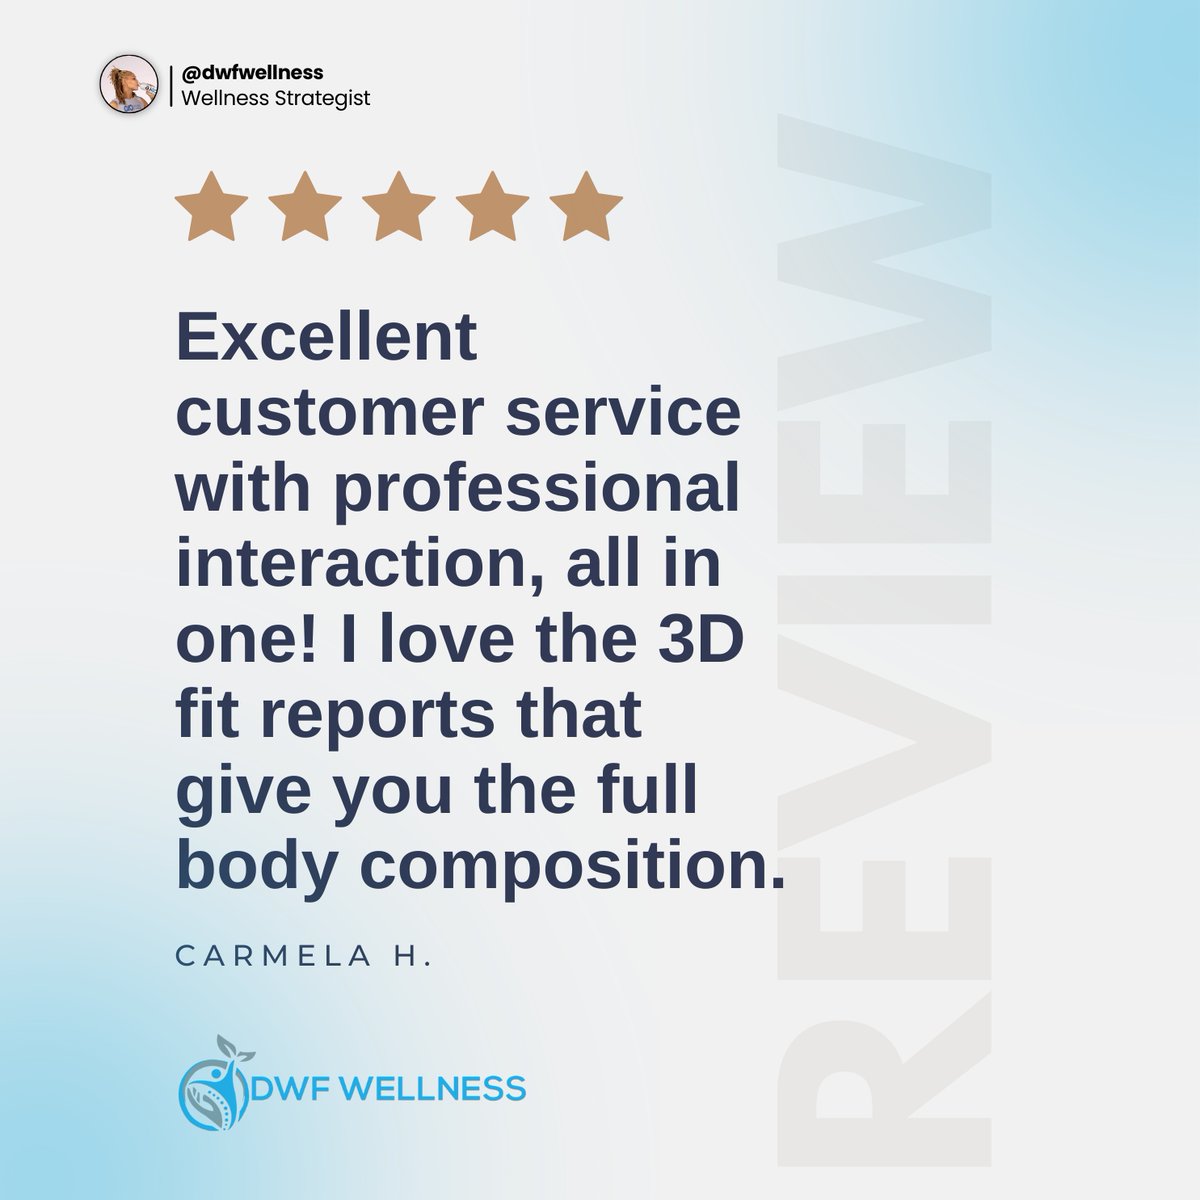 Thank you for your review❤️

#dwfwellness #medical #testimonial #wellness #fitness #medicalfitness #ga #georgia